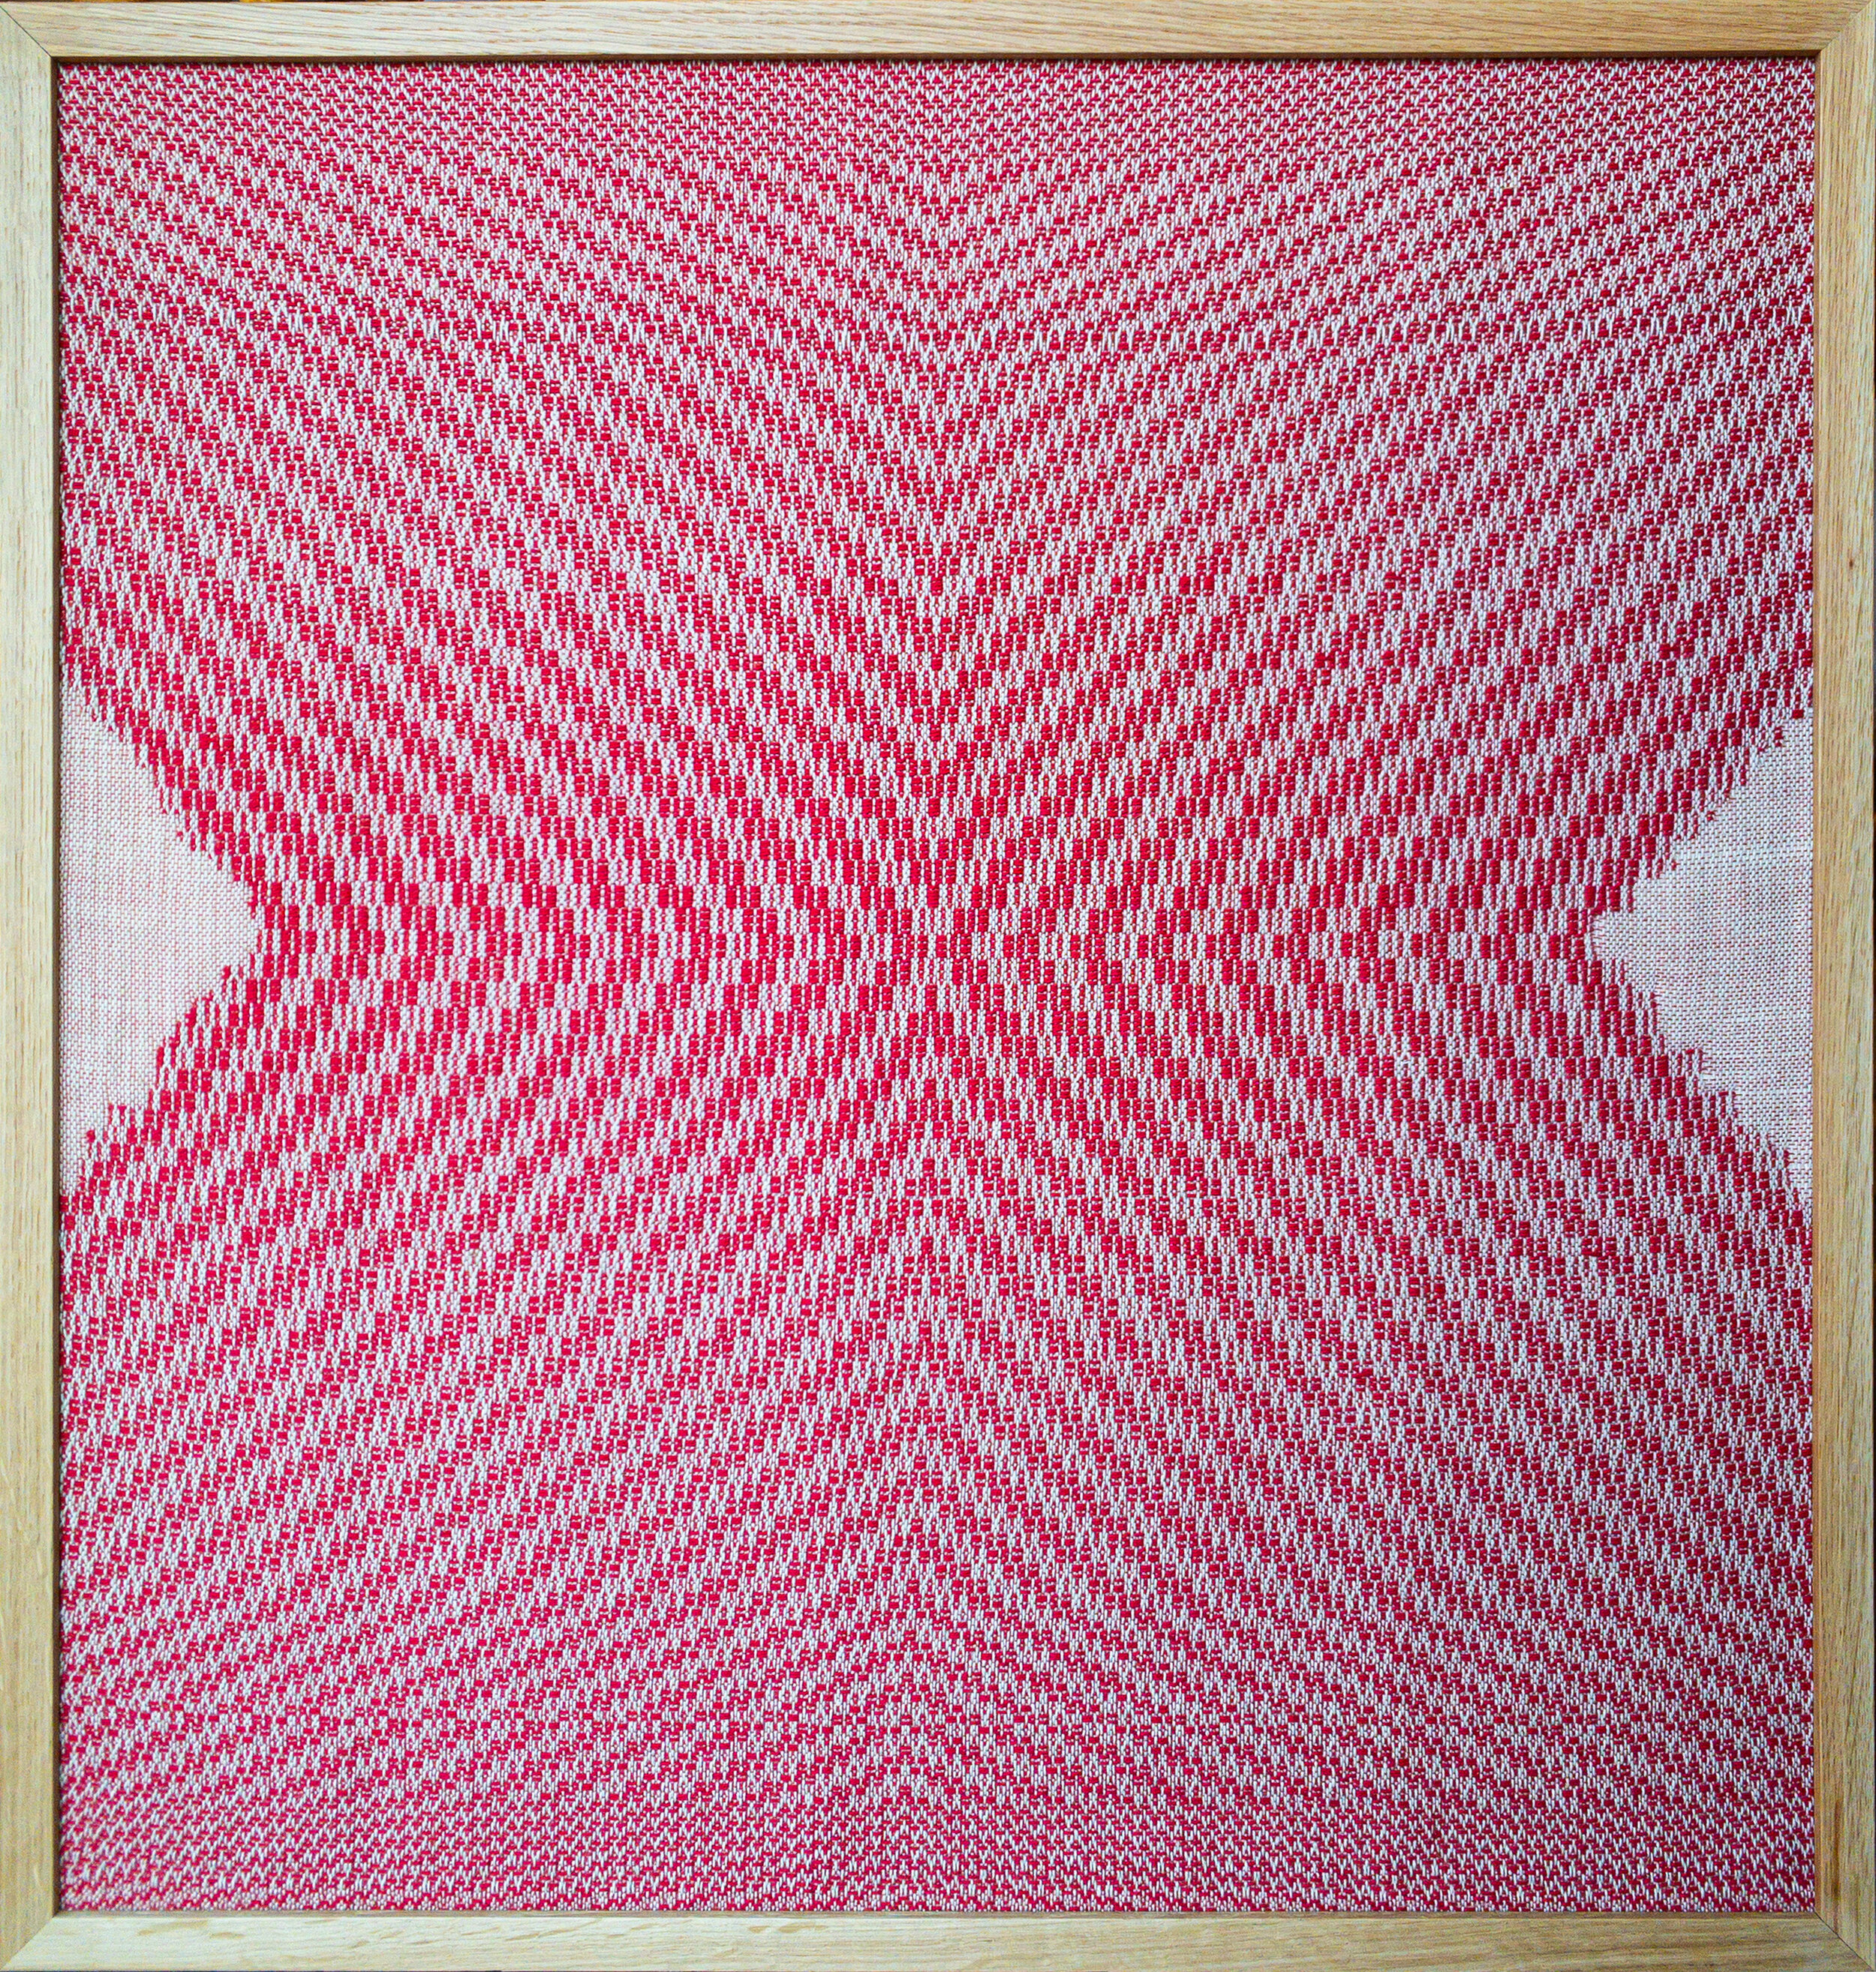 CURVED THREADING I, 2020, HANDWOVEN COTTON AND LINEN, 25" x 27"